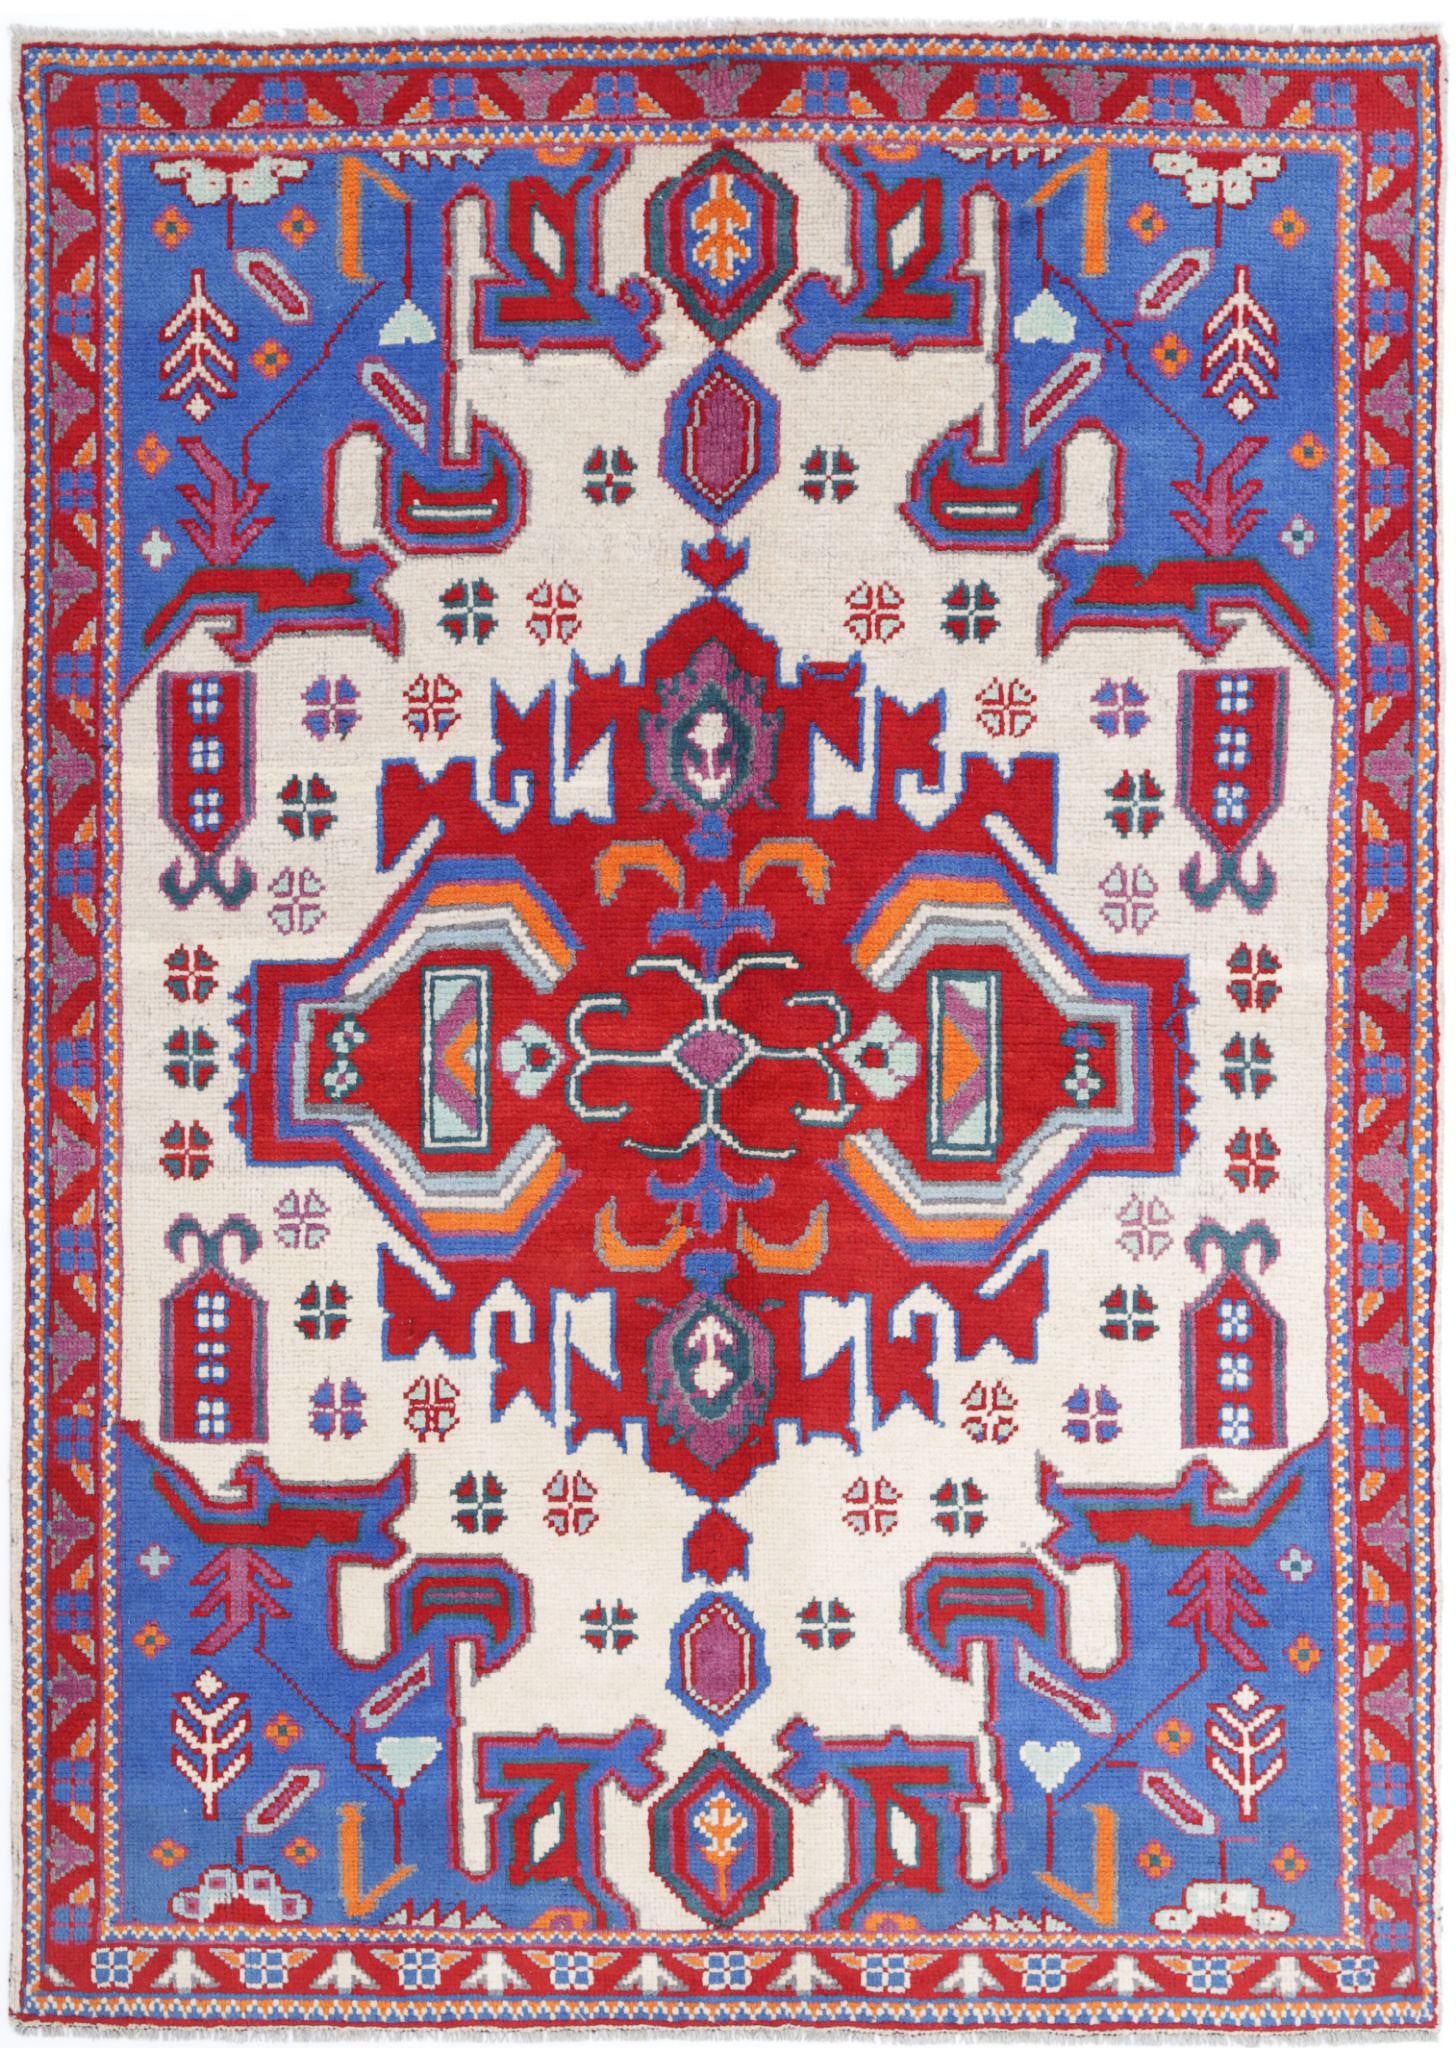 Revival-hand-knotted-qarghani-wool-rug-5014094.jpg